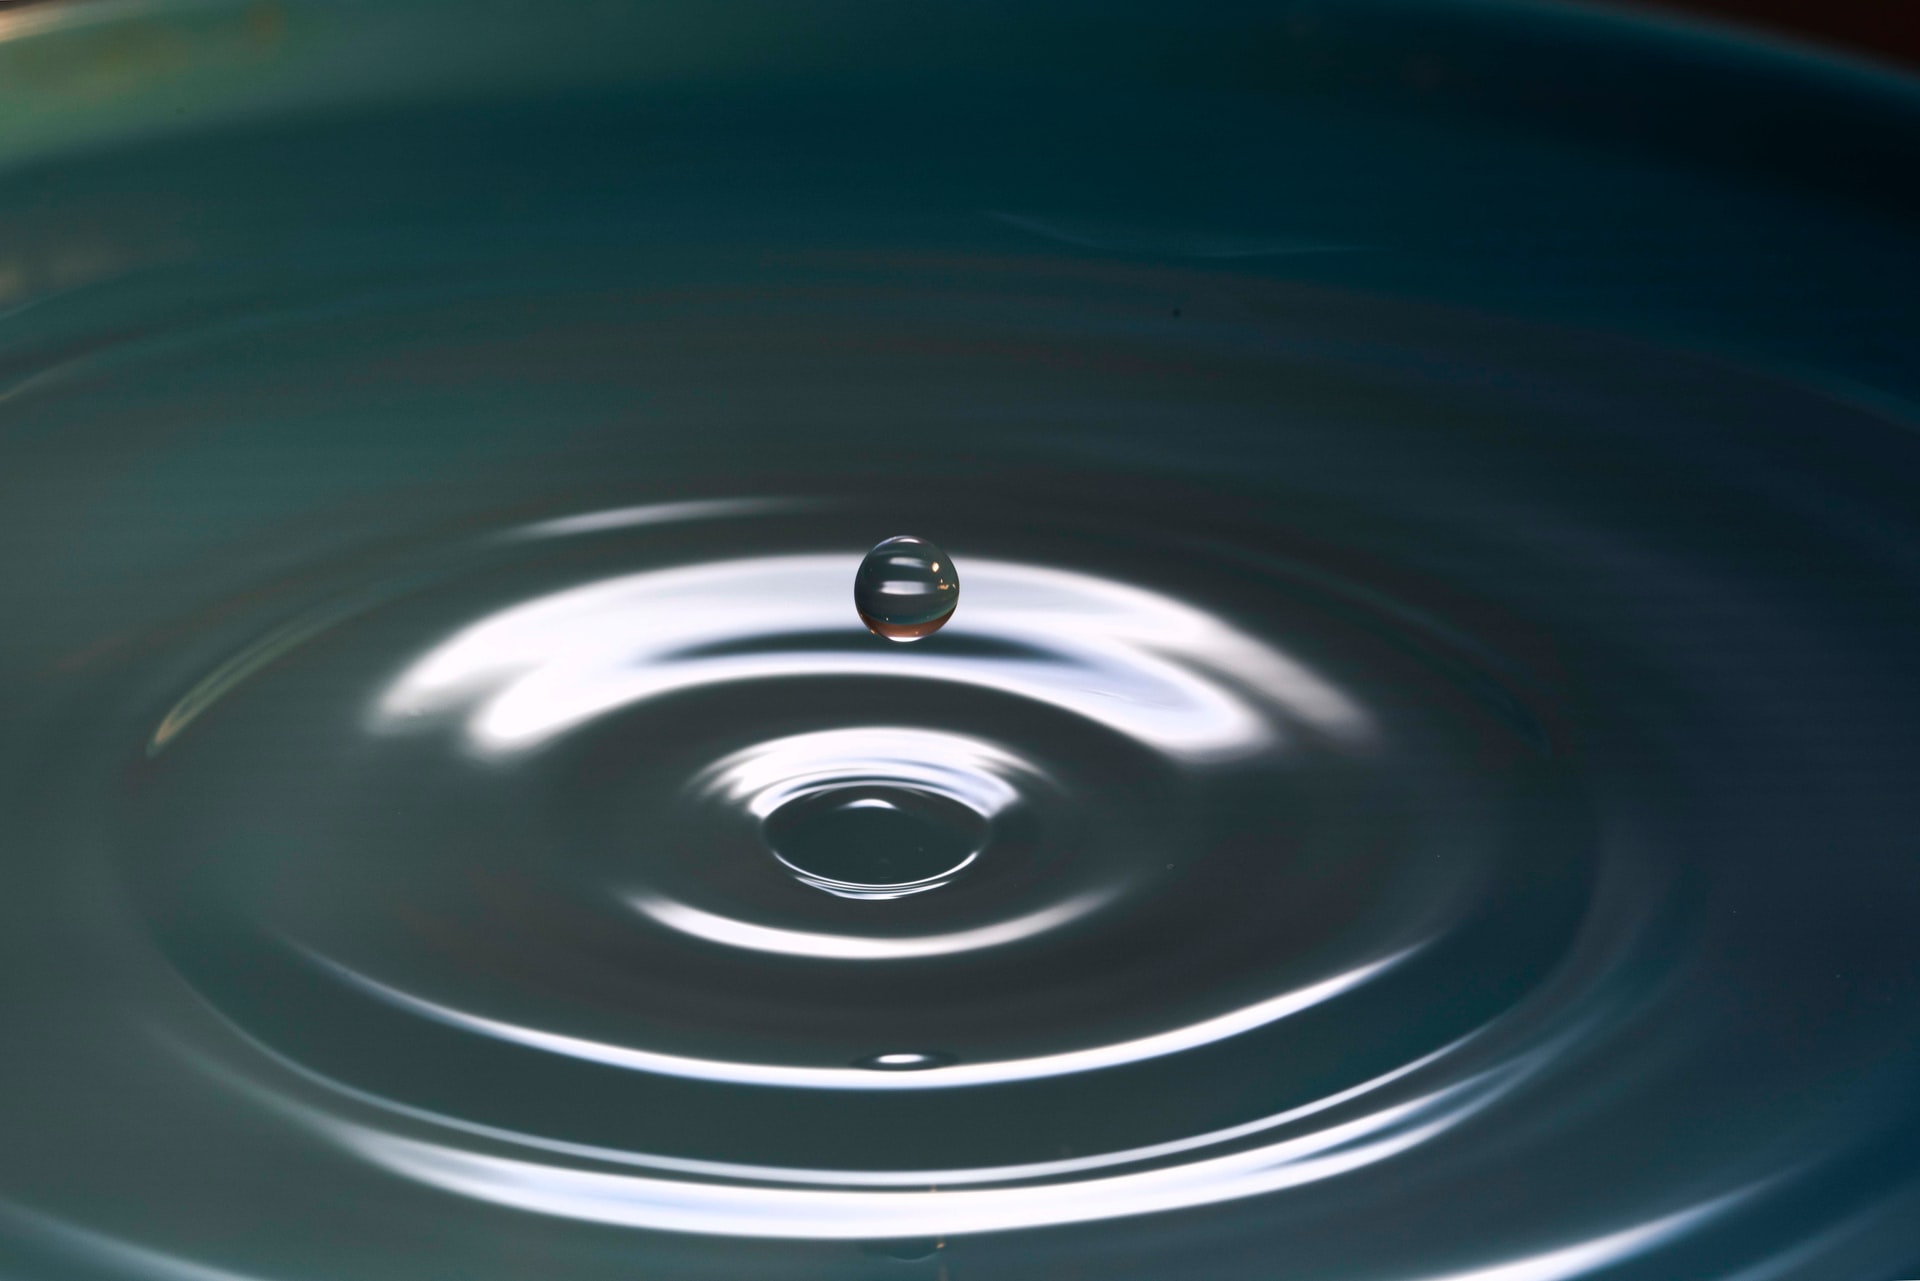 Drop of water bouncing off a rippled pond